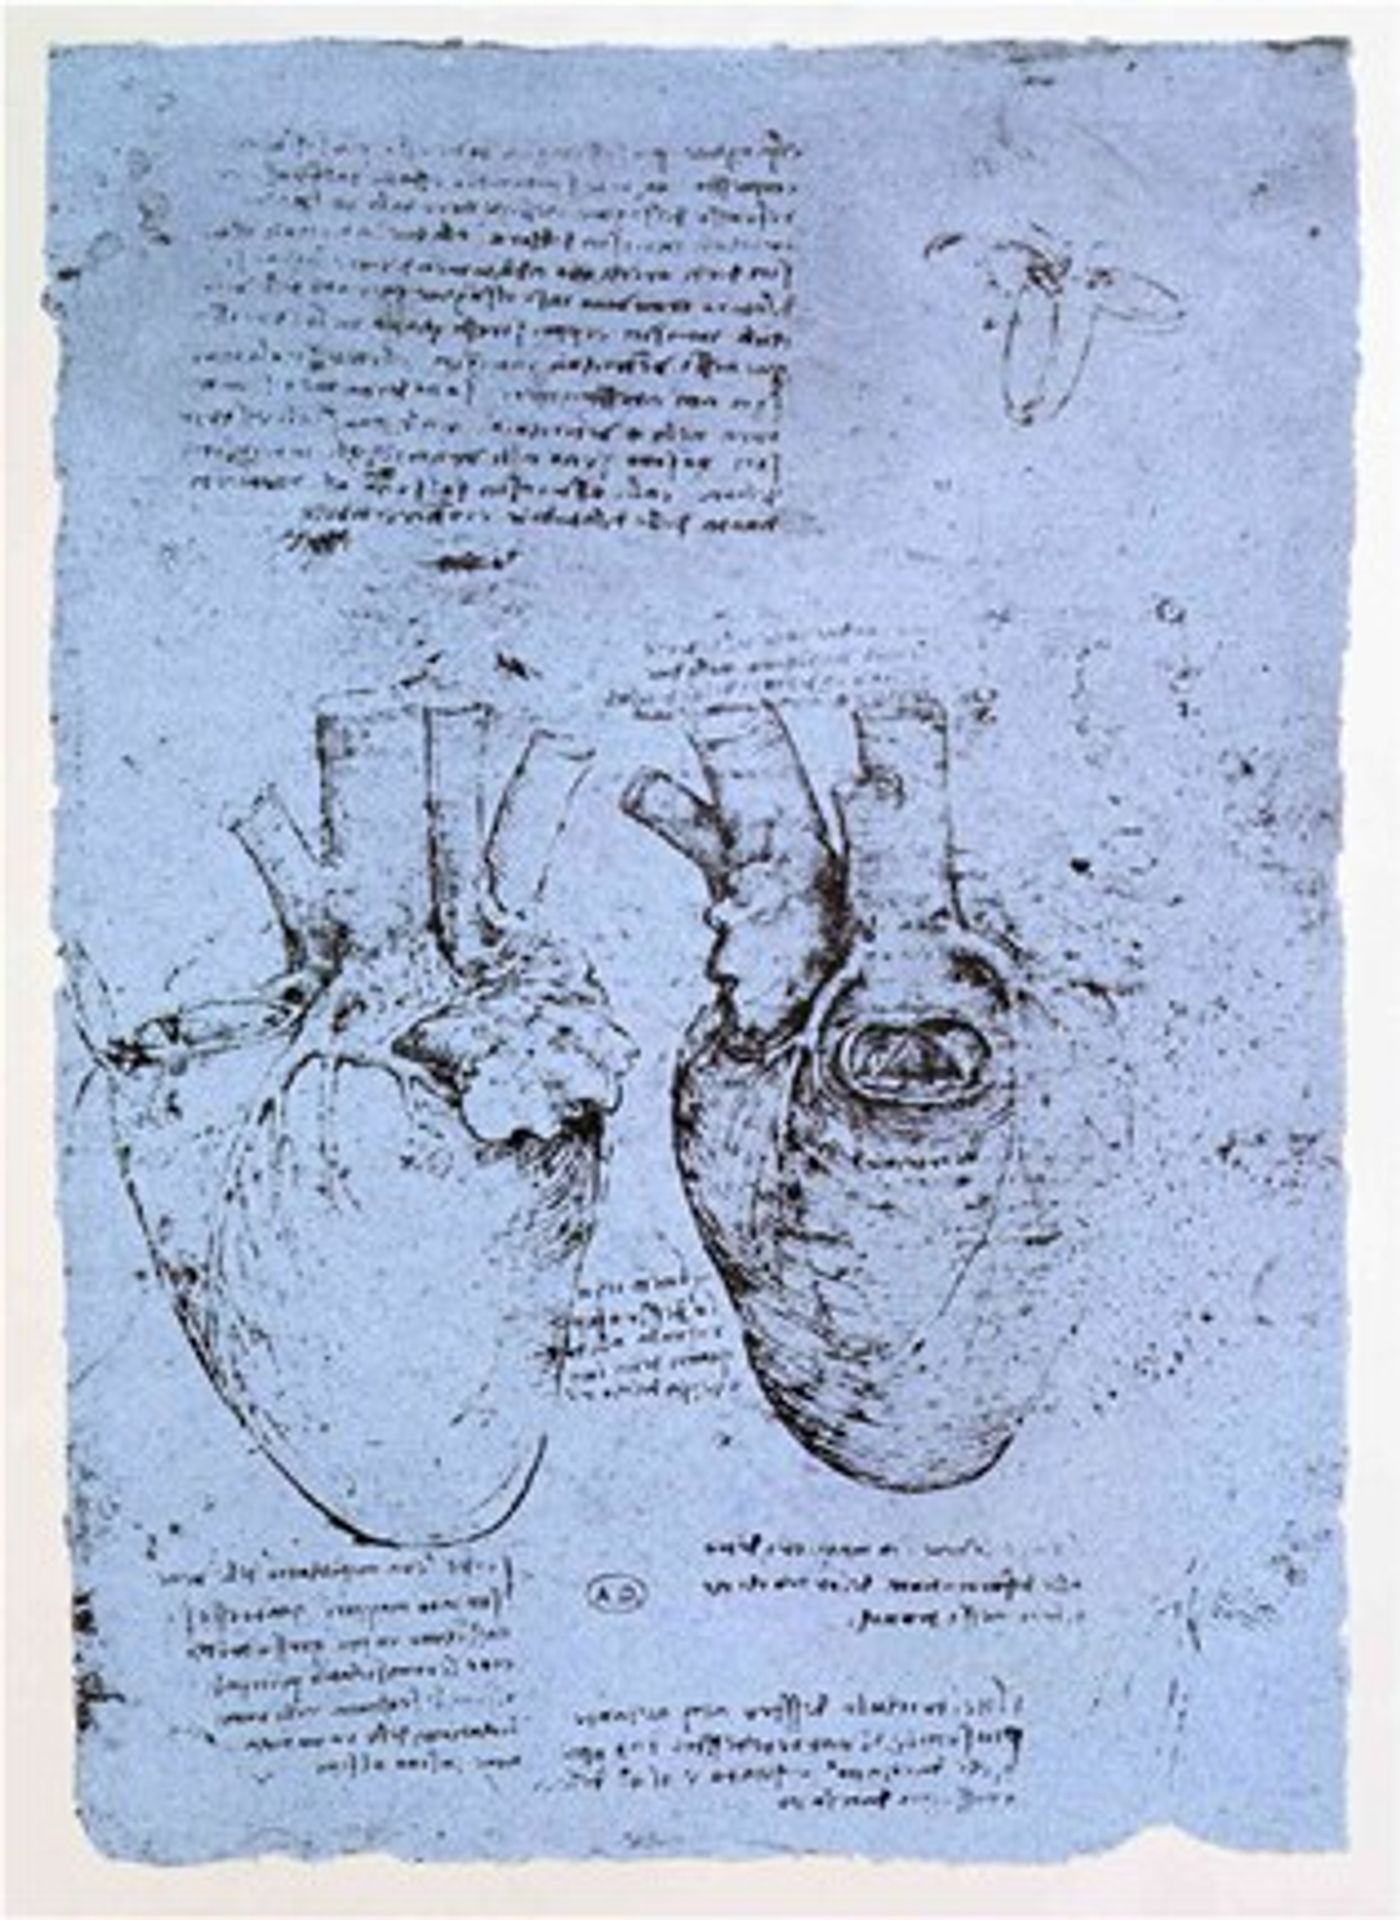 In the 1490s, Leonardo Da Vinci began to investigate the heart and its work. This sketch was part of his study of the human anatomy and the circulation system./ Credit: Public domain